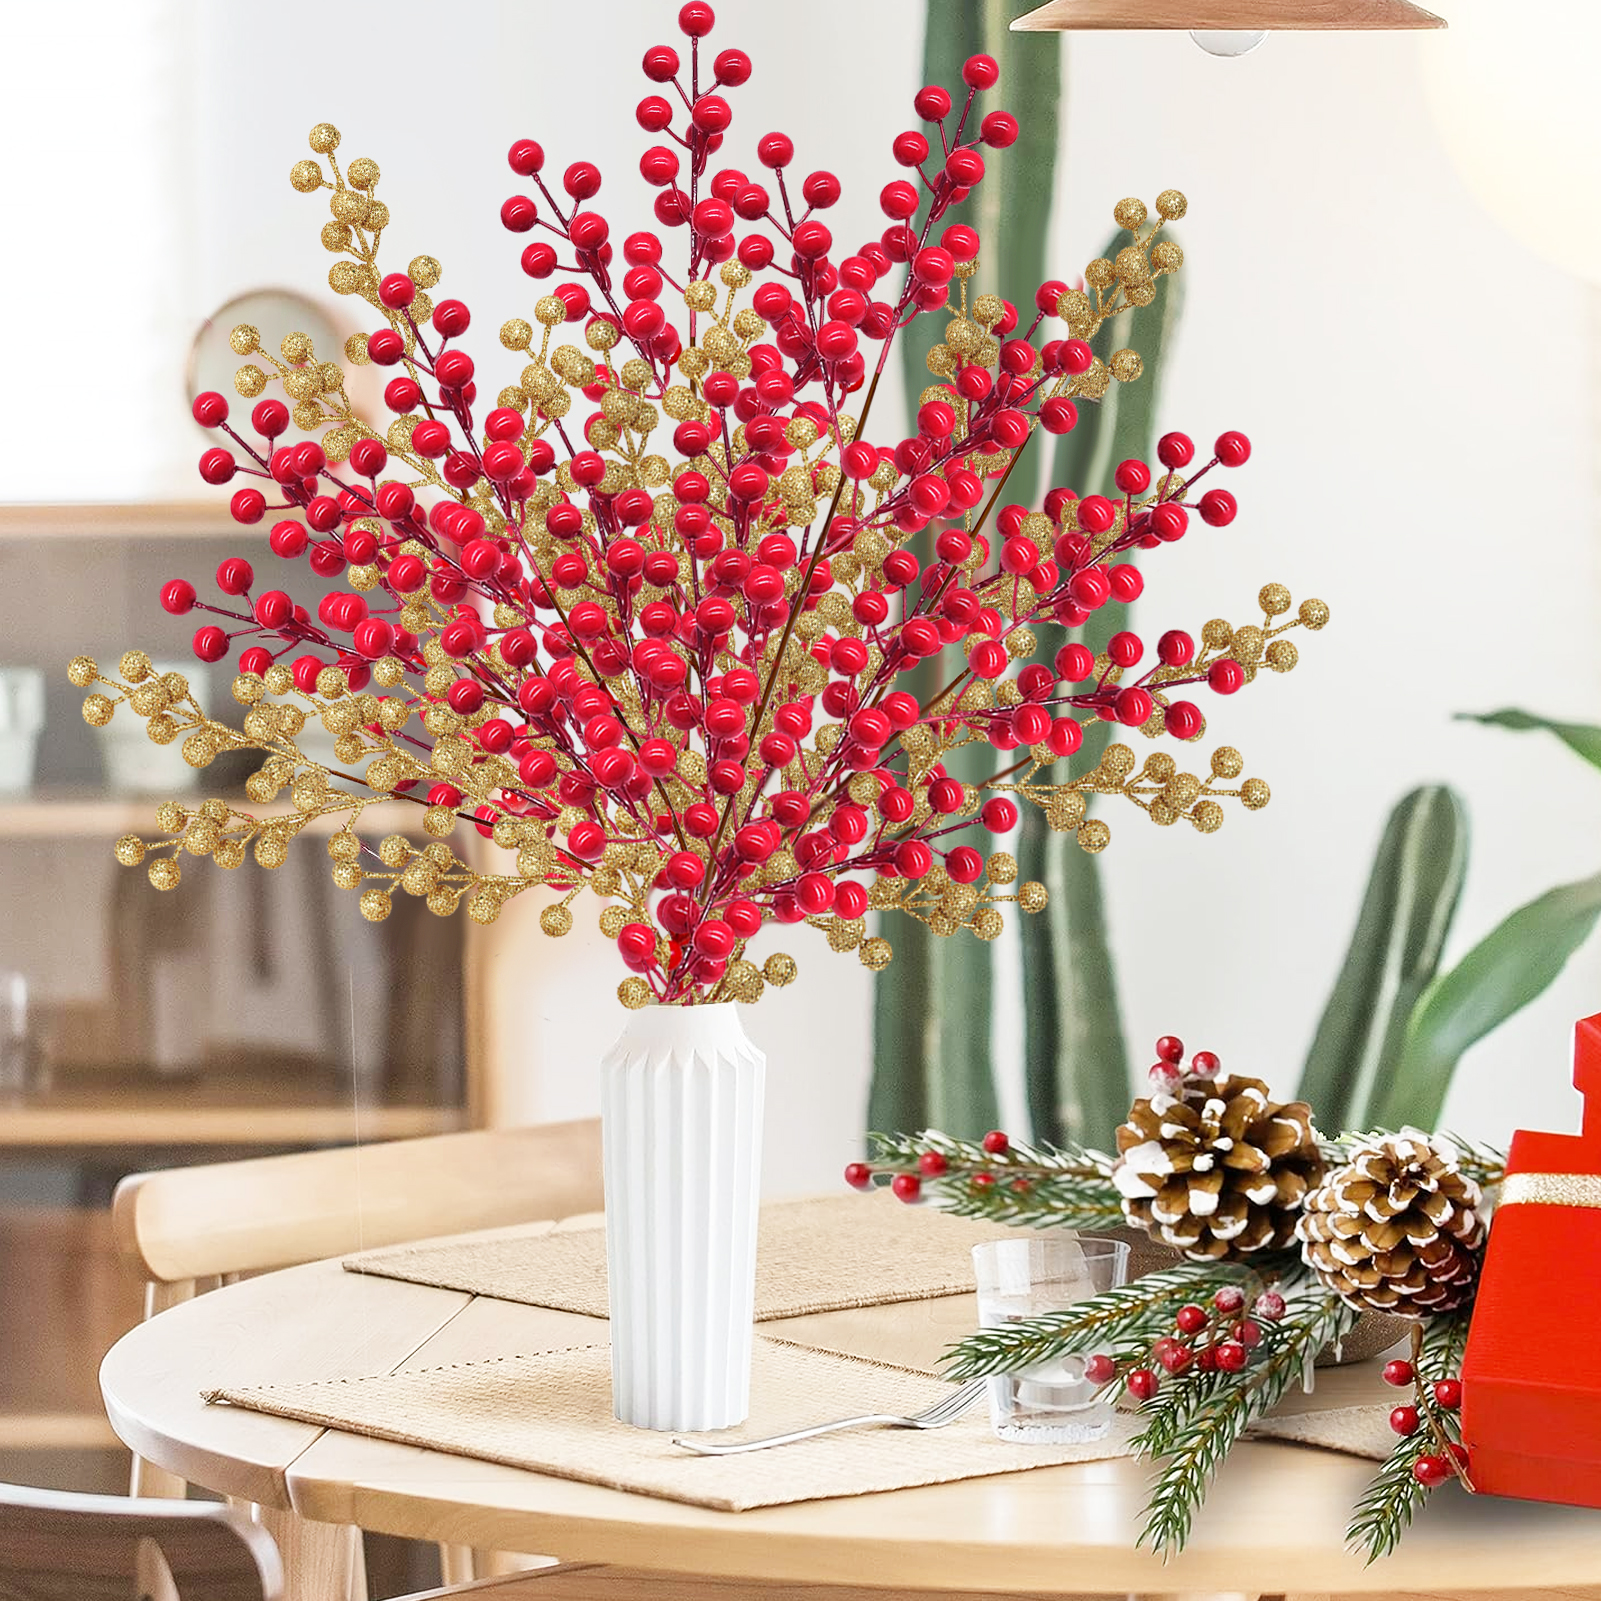 Unleash Potential by using Make a Merry Christmas Red Berry Stems (40  Piece) 858